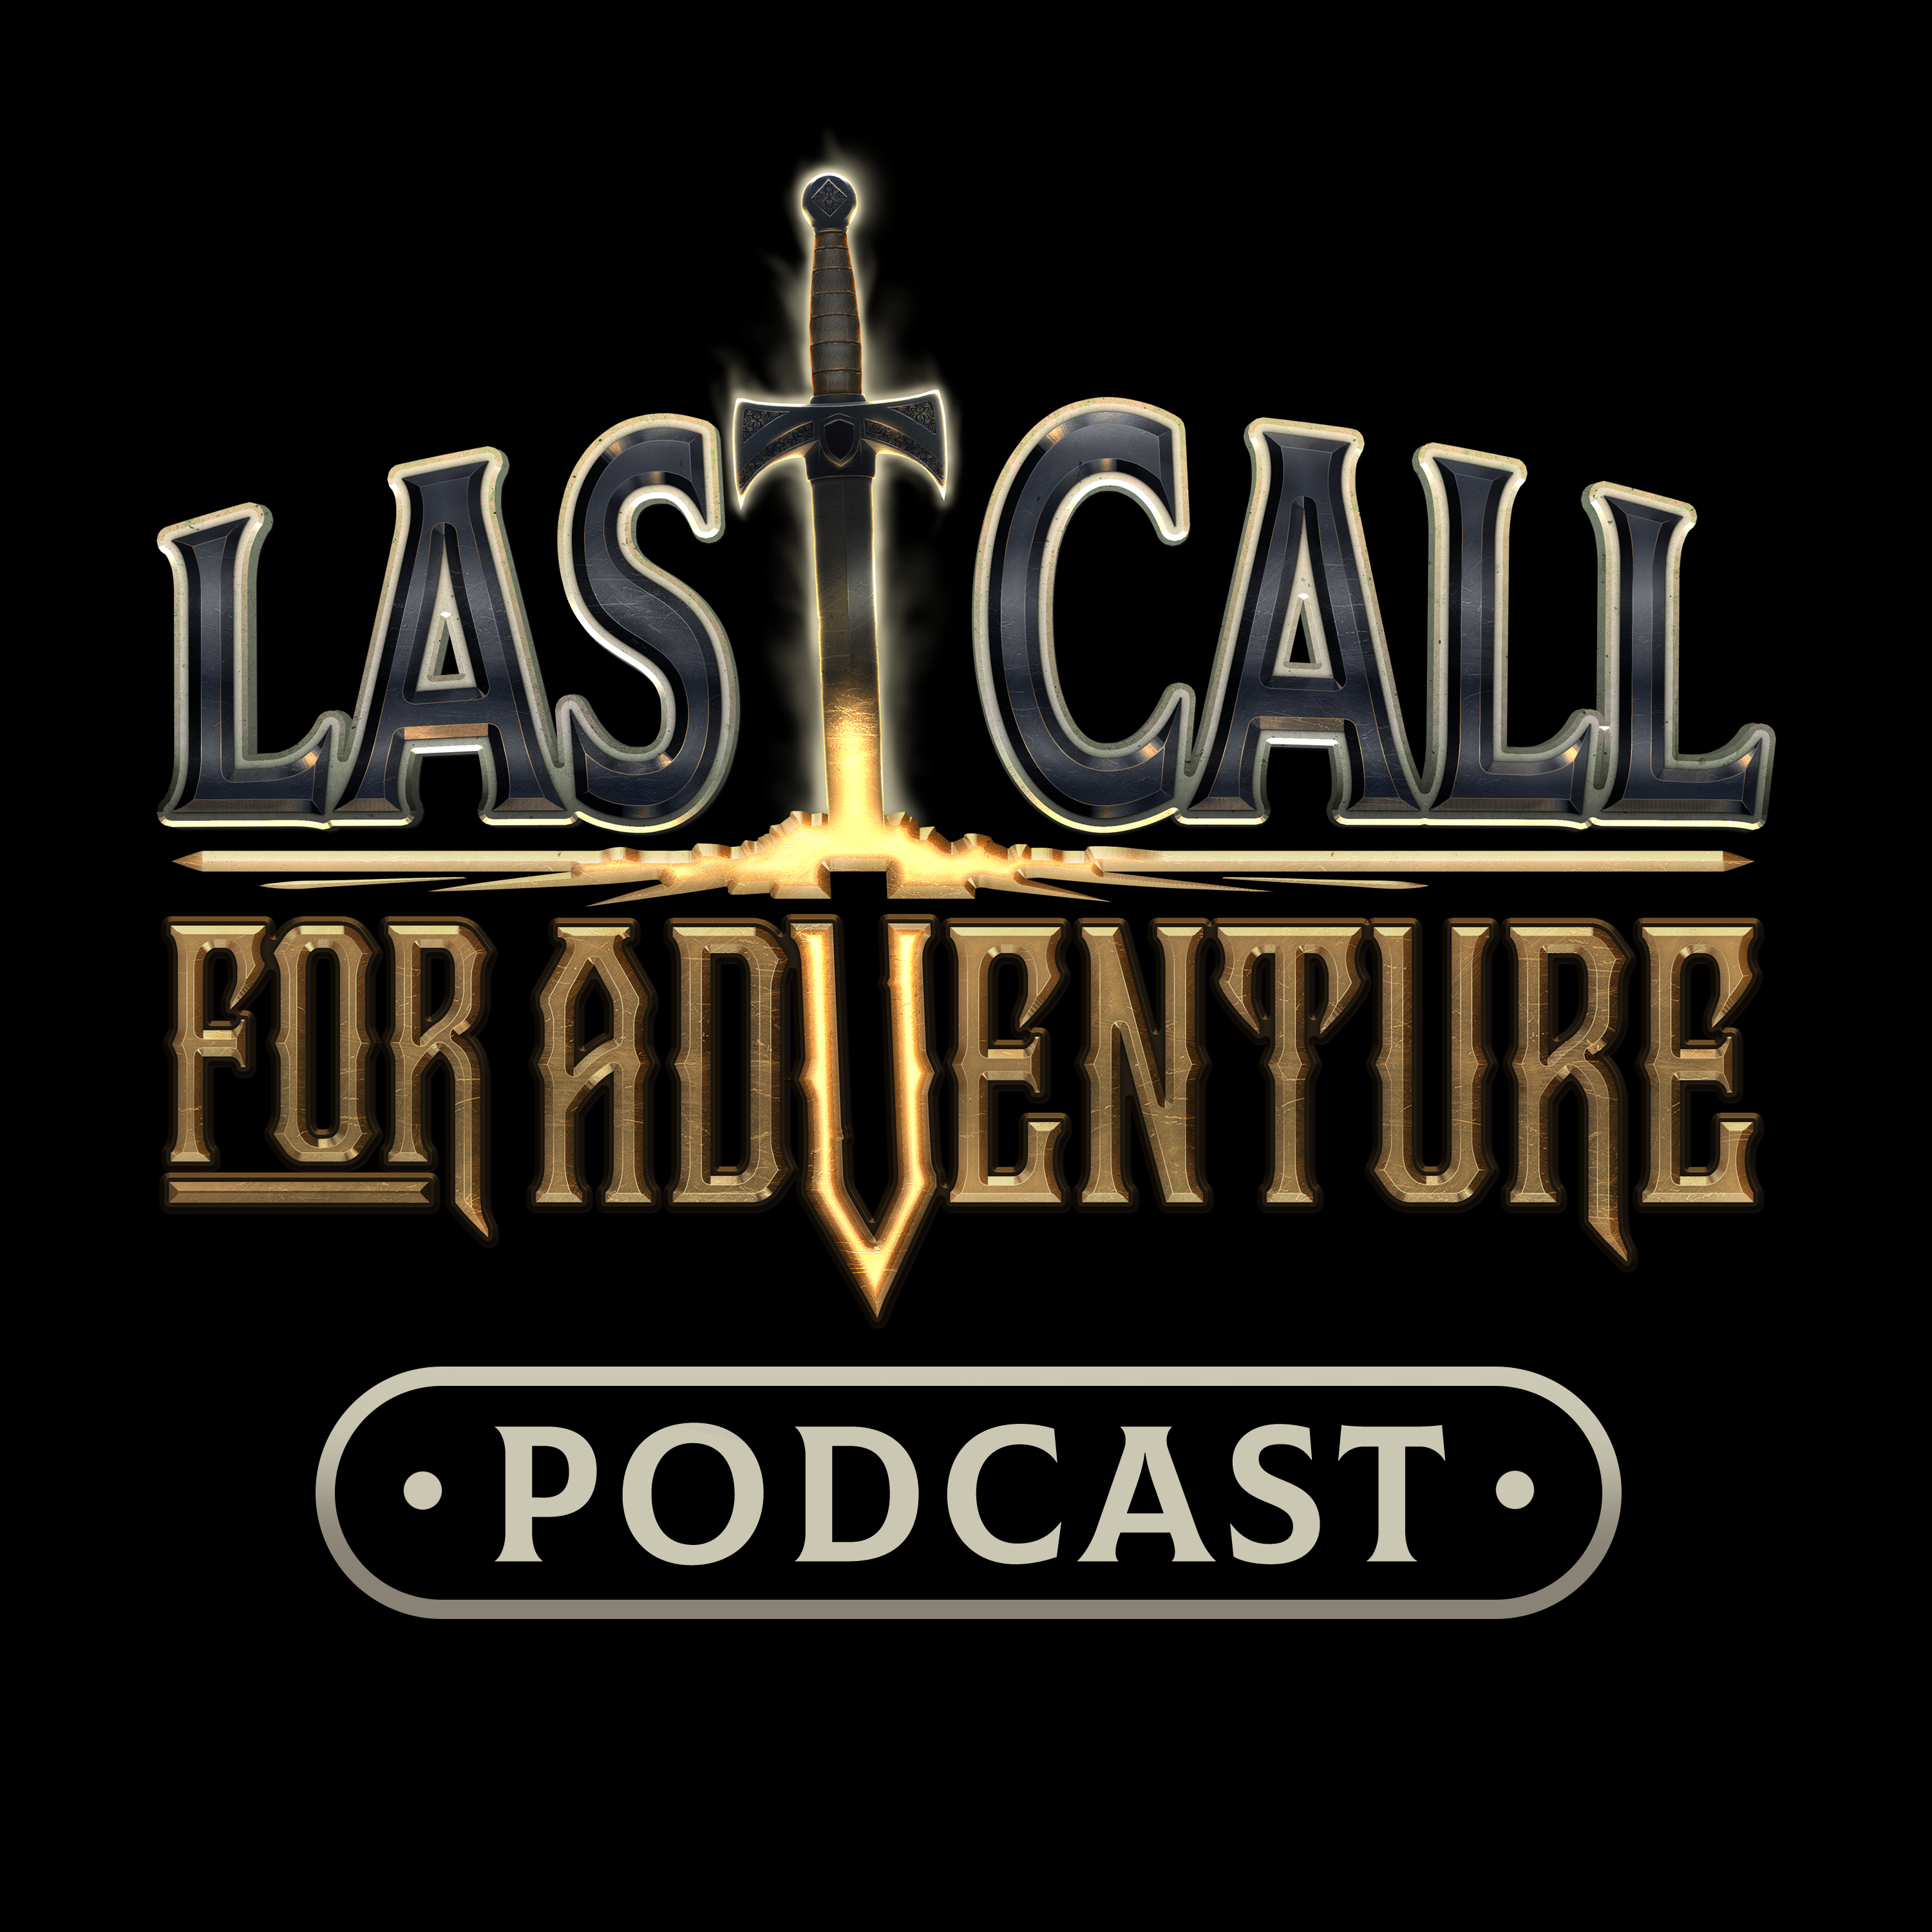 Last Call For Adventure - Crew 4 Episode 3: This Line of Work